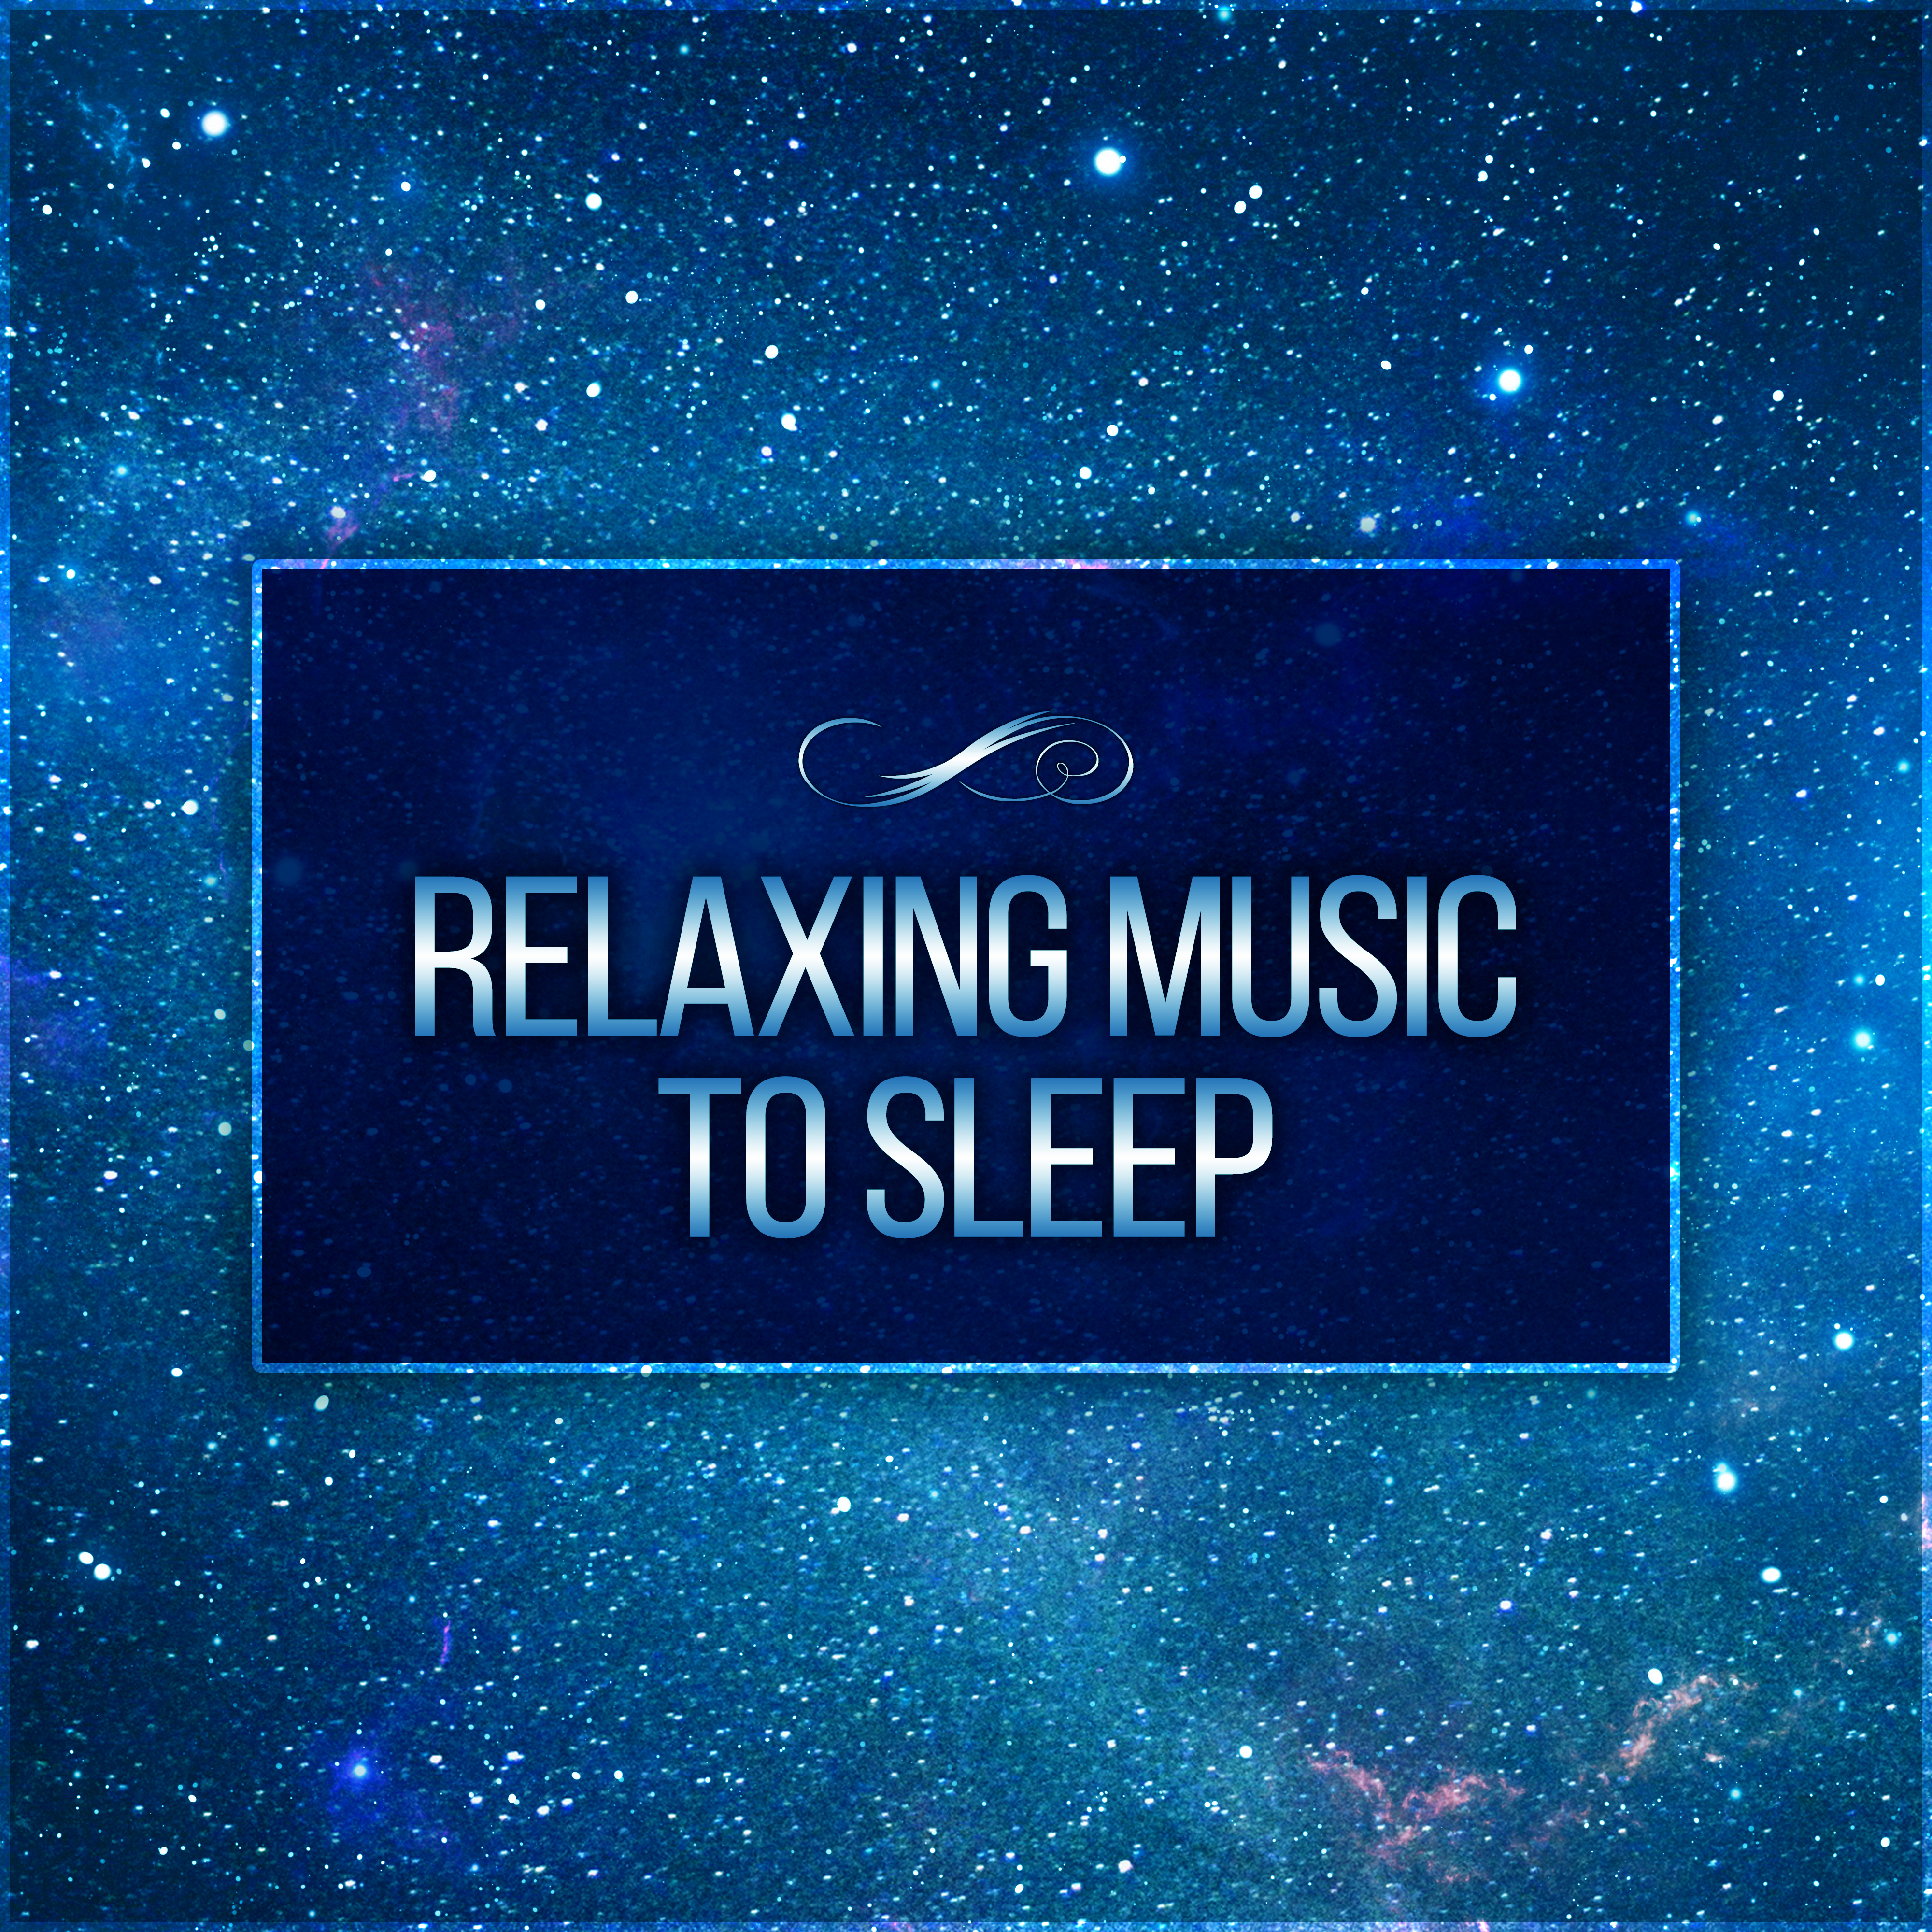 Relaxing Music to Sleep – Relaxing New Age Music, Sounds of Calmness, Sleep Well, Sweet Dreams